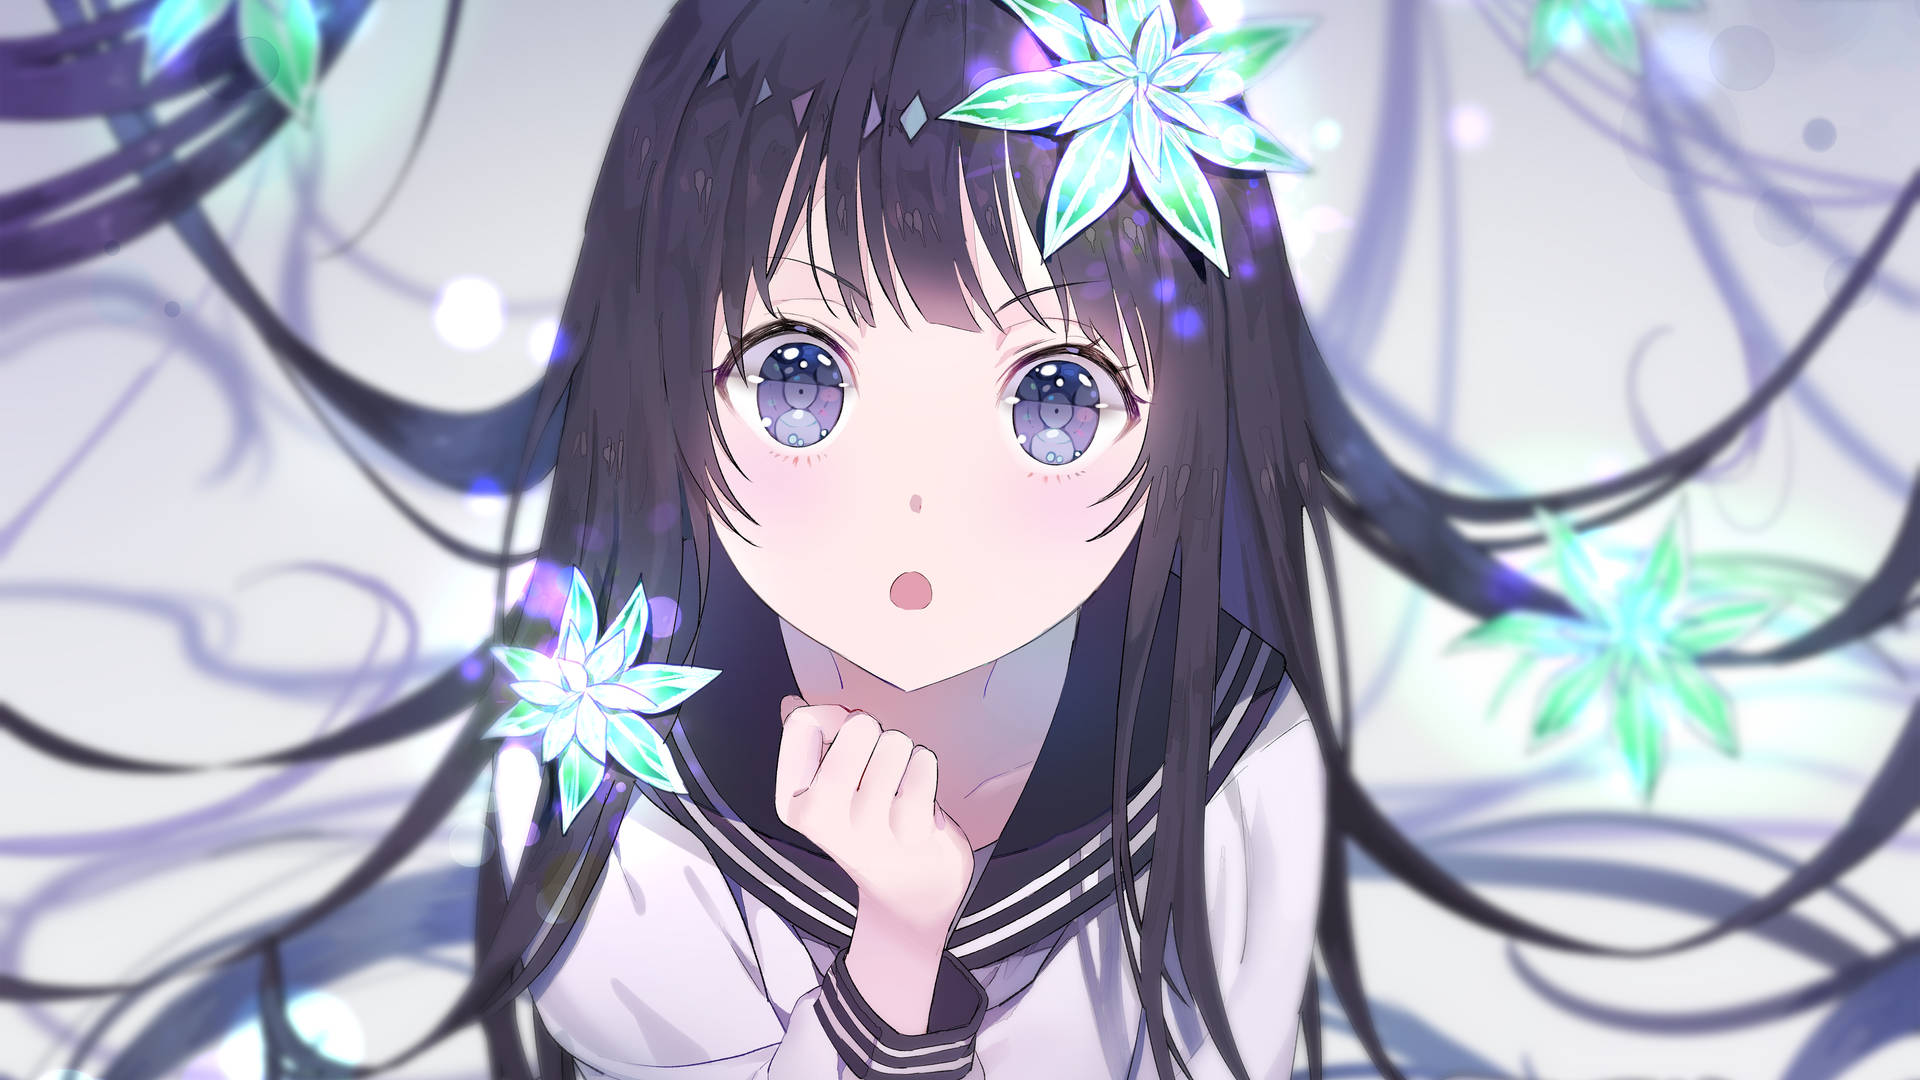 Cute Anime Girl Watching Flowers Falling Background